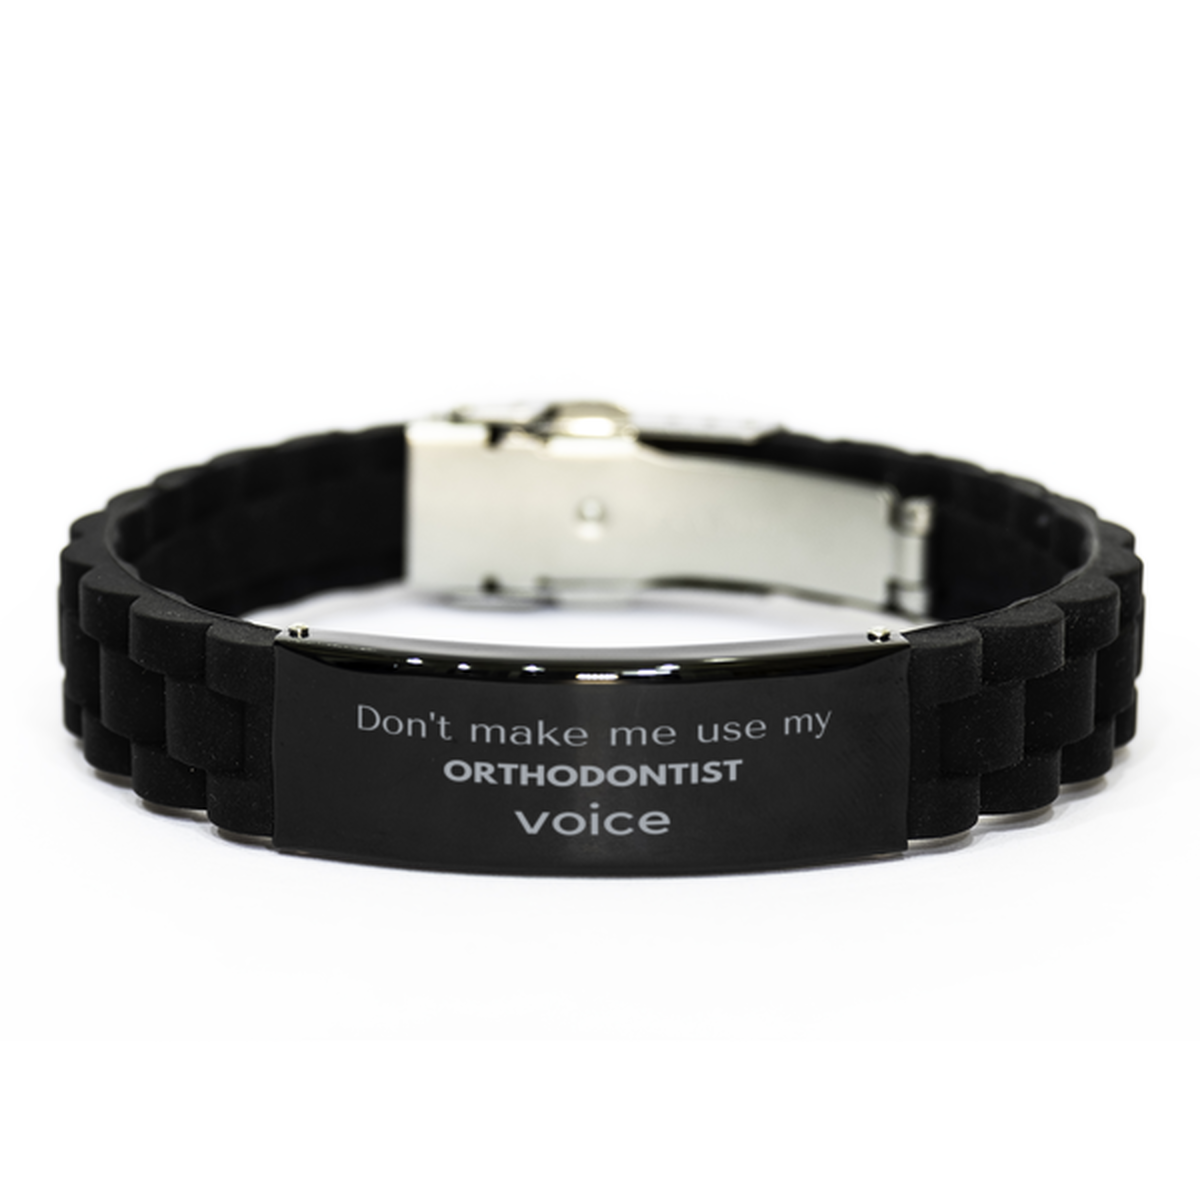 Don't make me use my Orthodontist voice, Sarcasm Orthodontist Gifts, Christmas Orthodontist Black Glidelock Clasp Bracelet Birthday Unique Gifts For Orthodontist Coworkers, Men, Women, Colleague, Friends